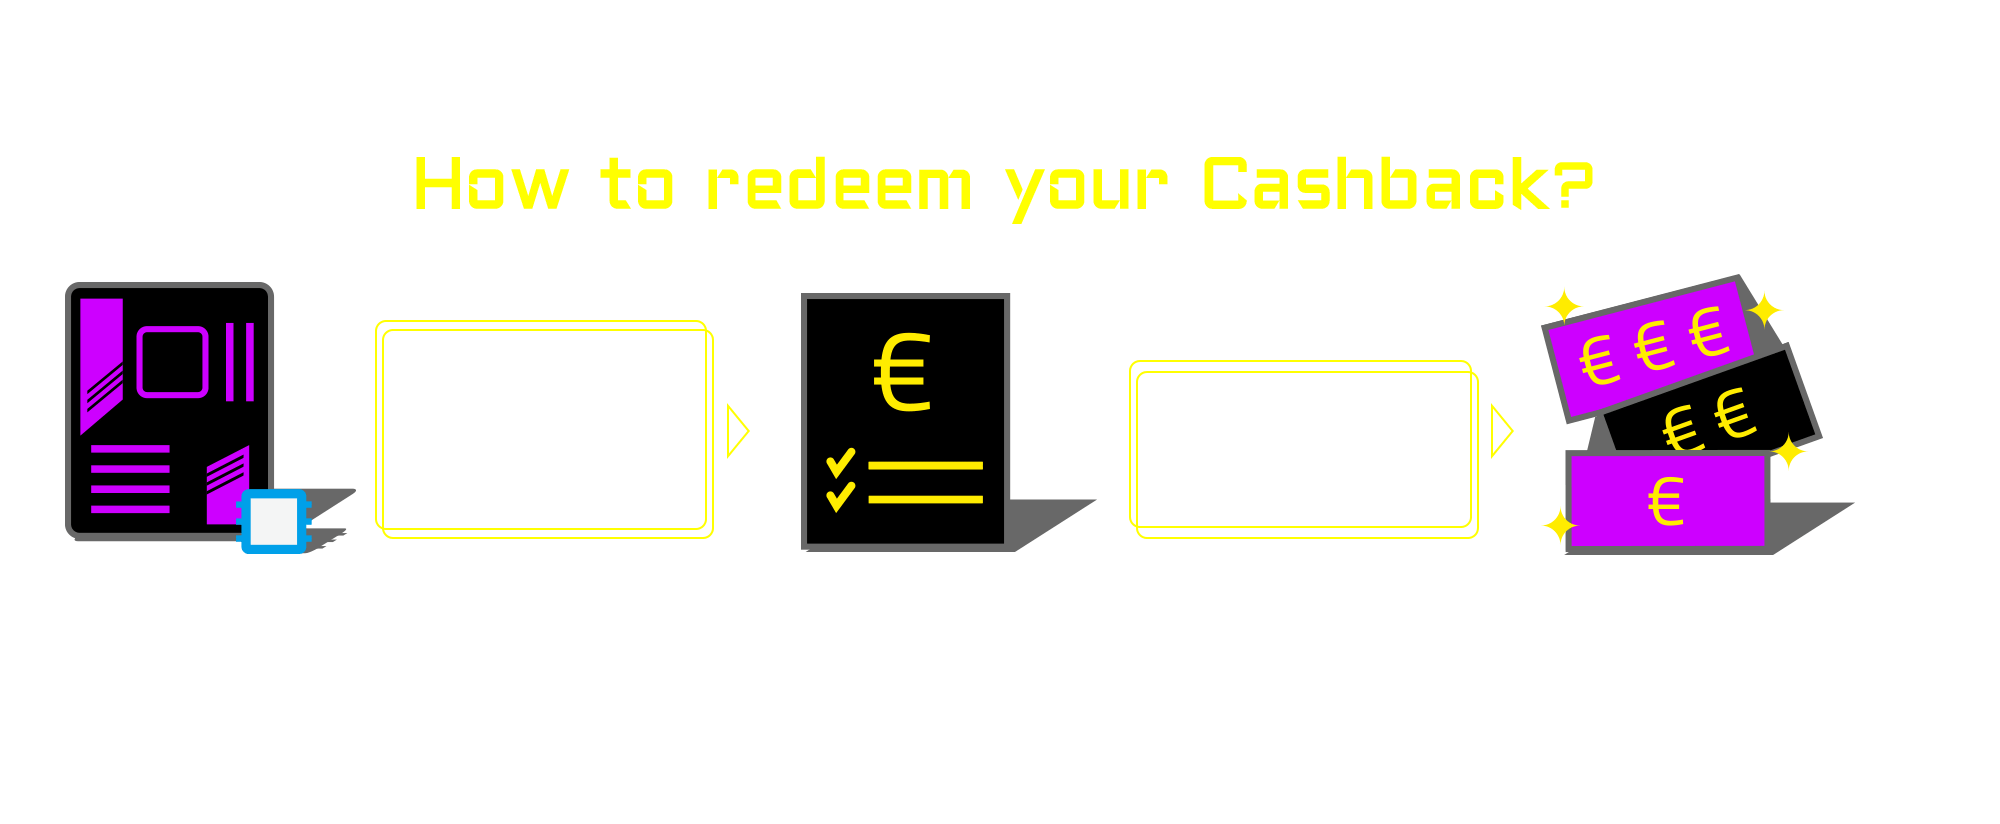 How to redeem your Cashback?